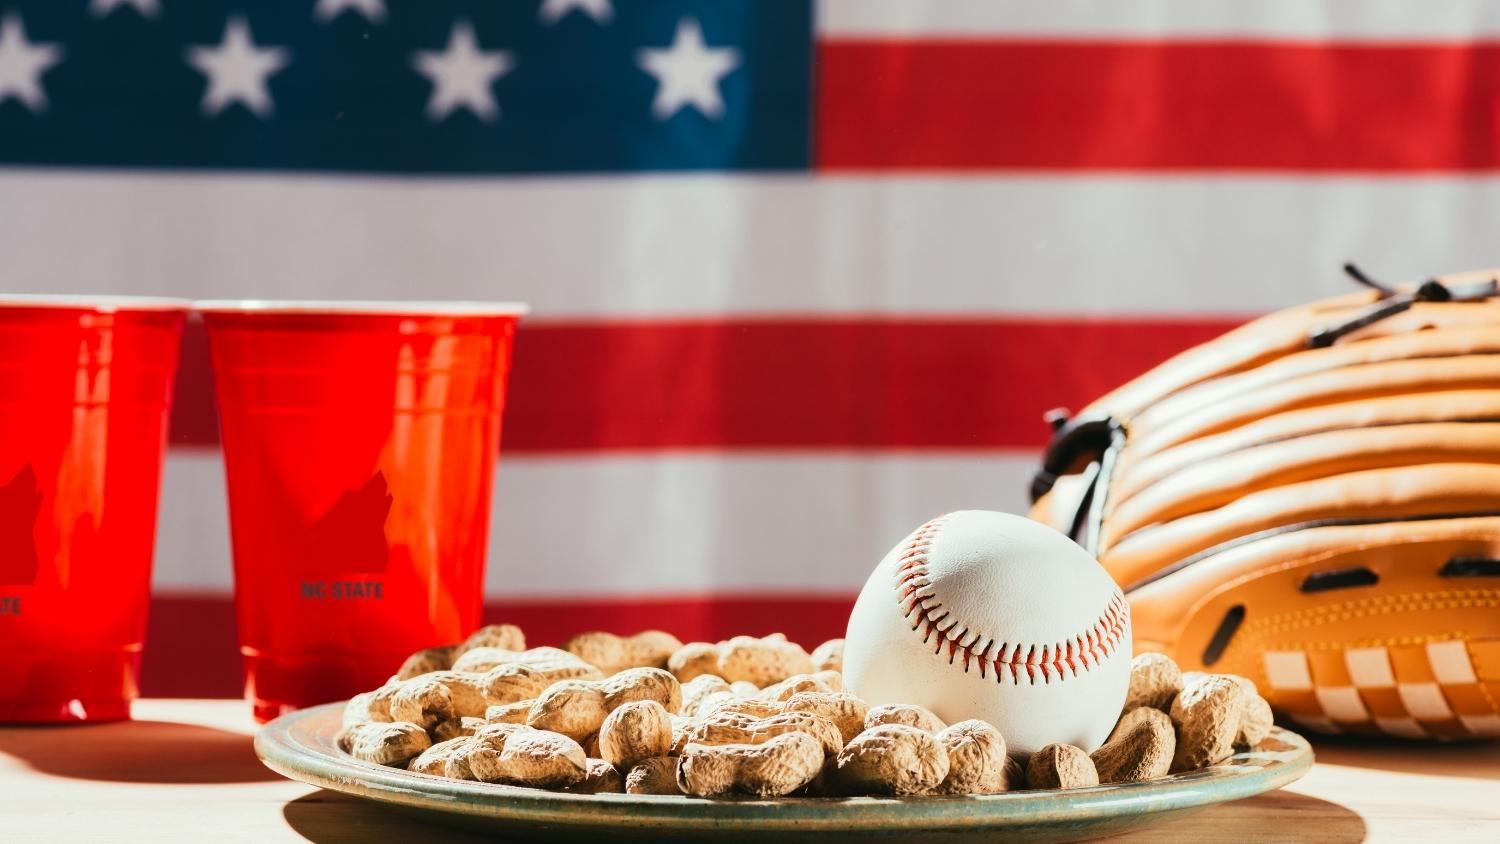 a plate of peanuts with a baseball and a baseball glove.